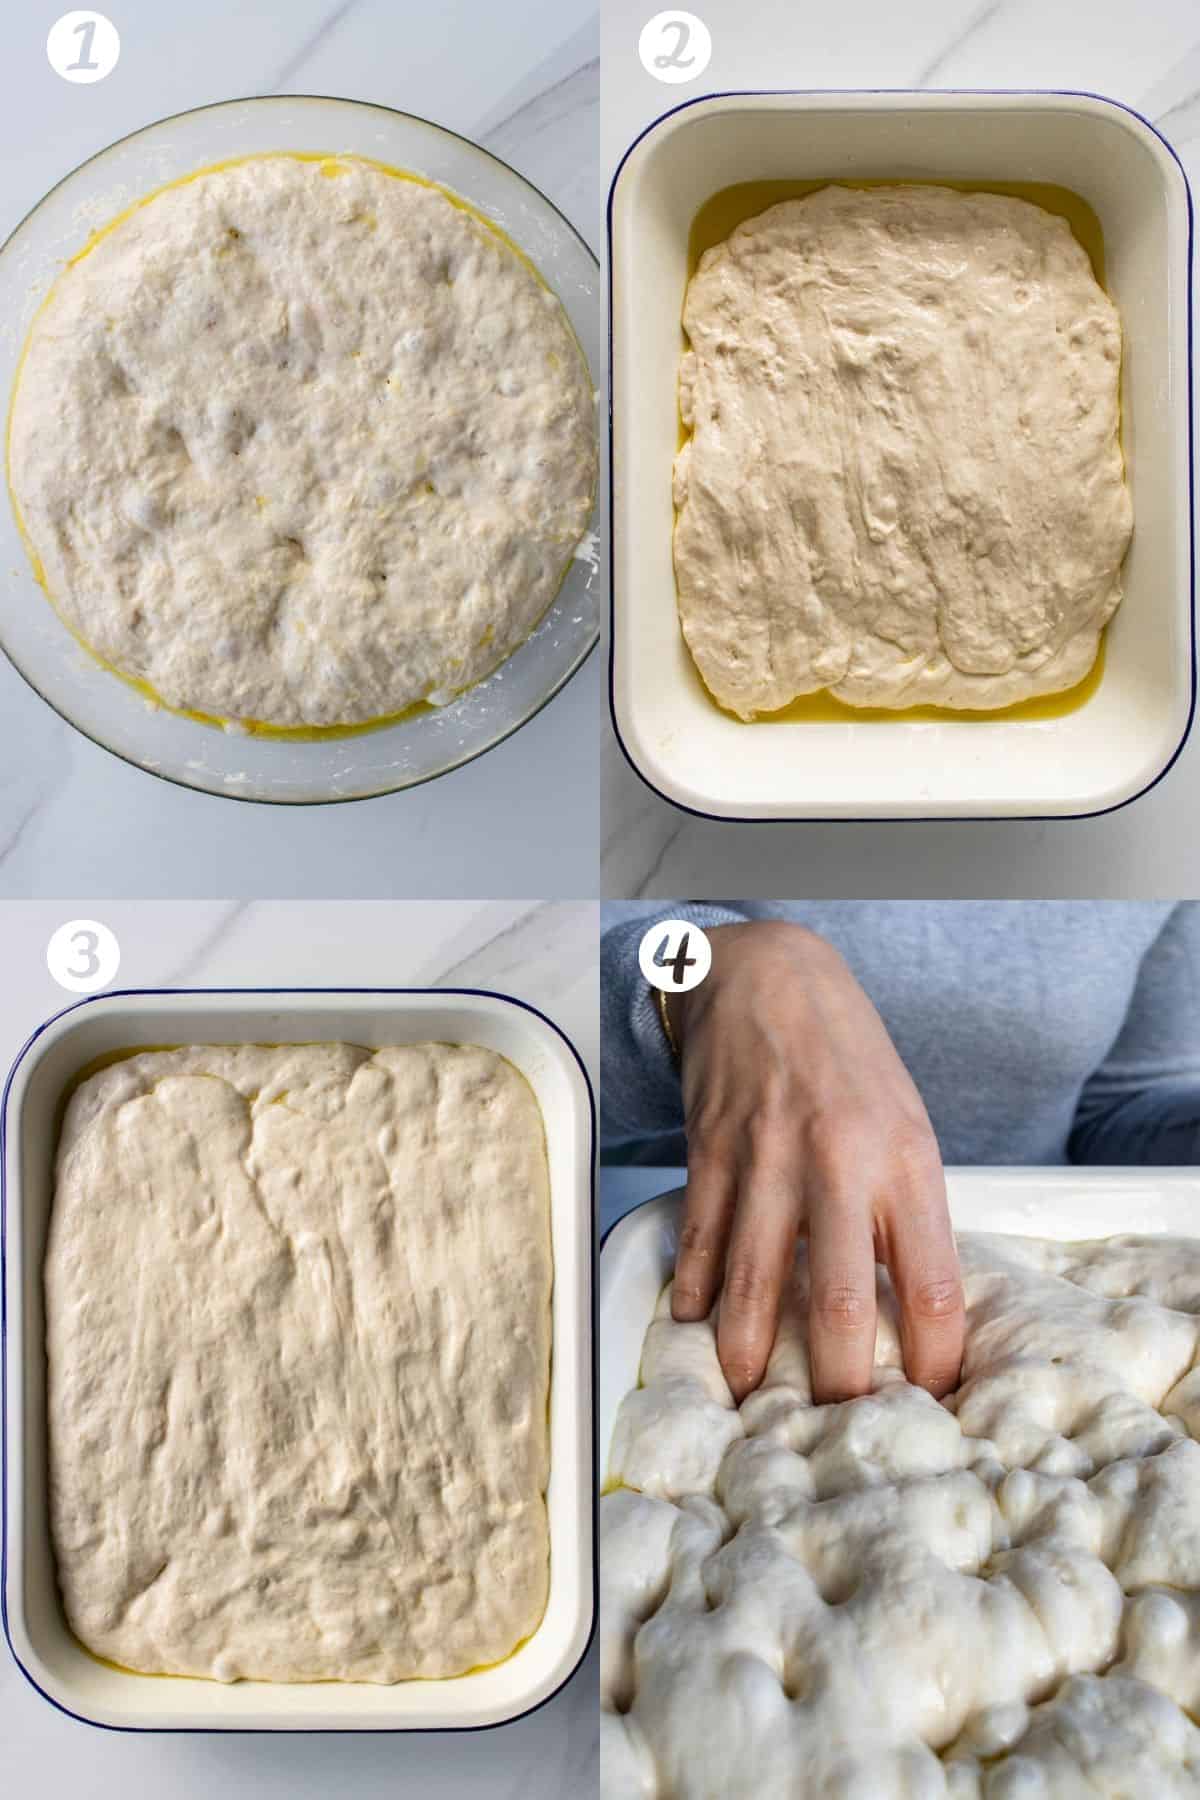 https://cookingwithayeh.com/wp-content/uploads/2021/07/No-Knead-Focaccia-4-Steps.jpg